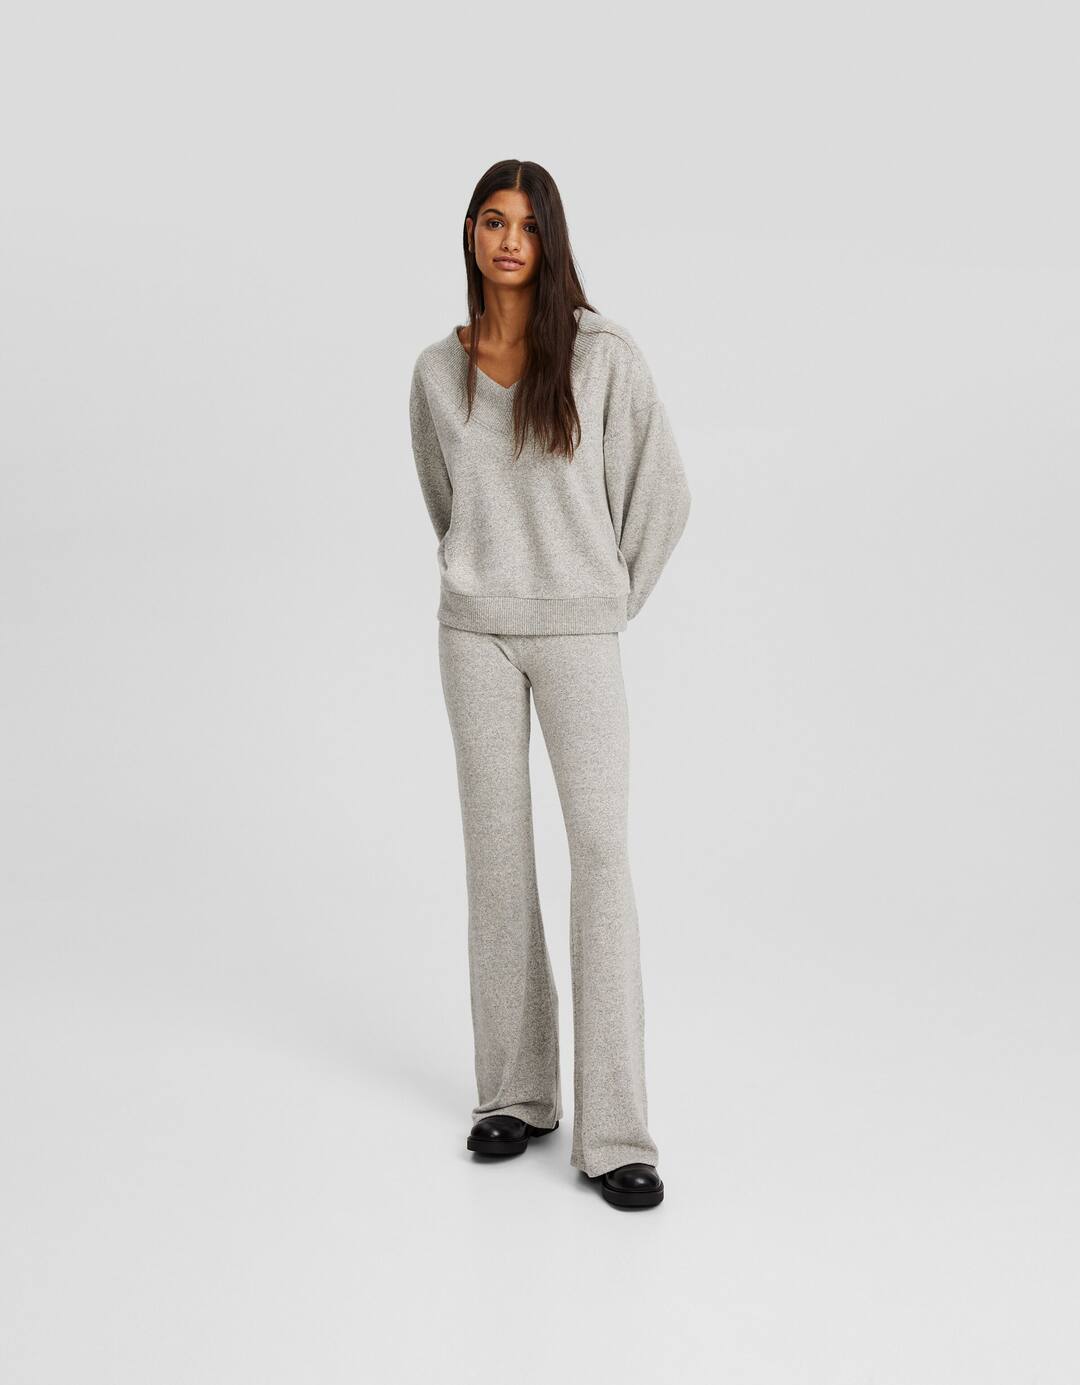 Knit flared trousers